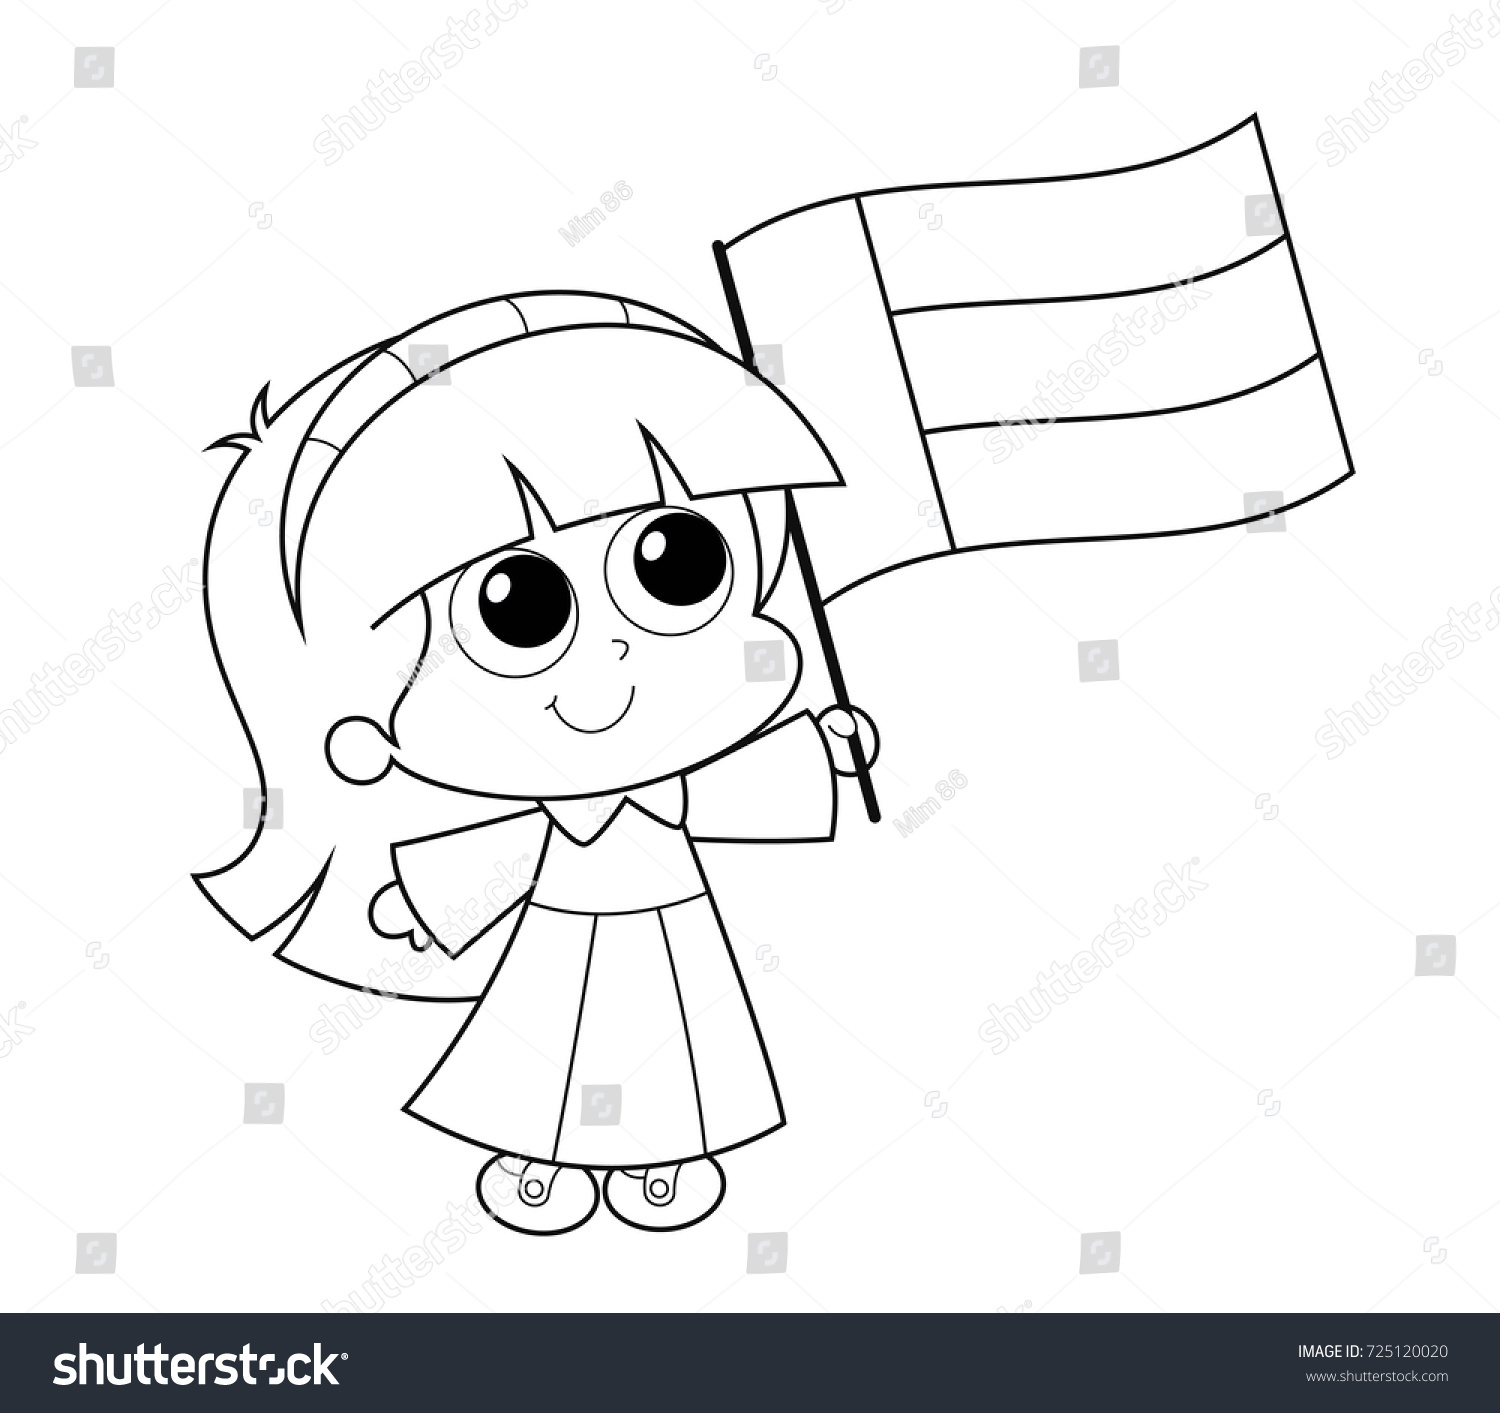 United Arab Emirates Flag Coloring Page | Top Free Printable Coloring